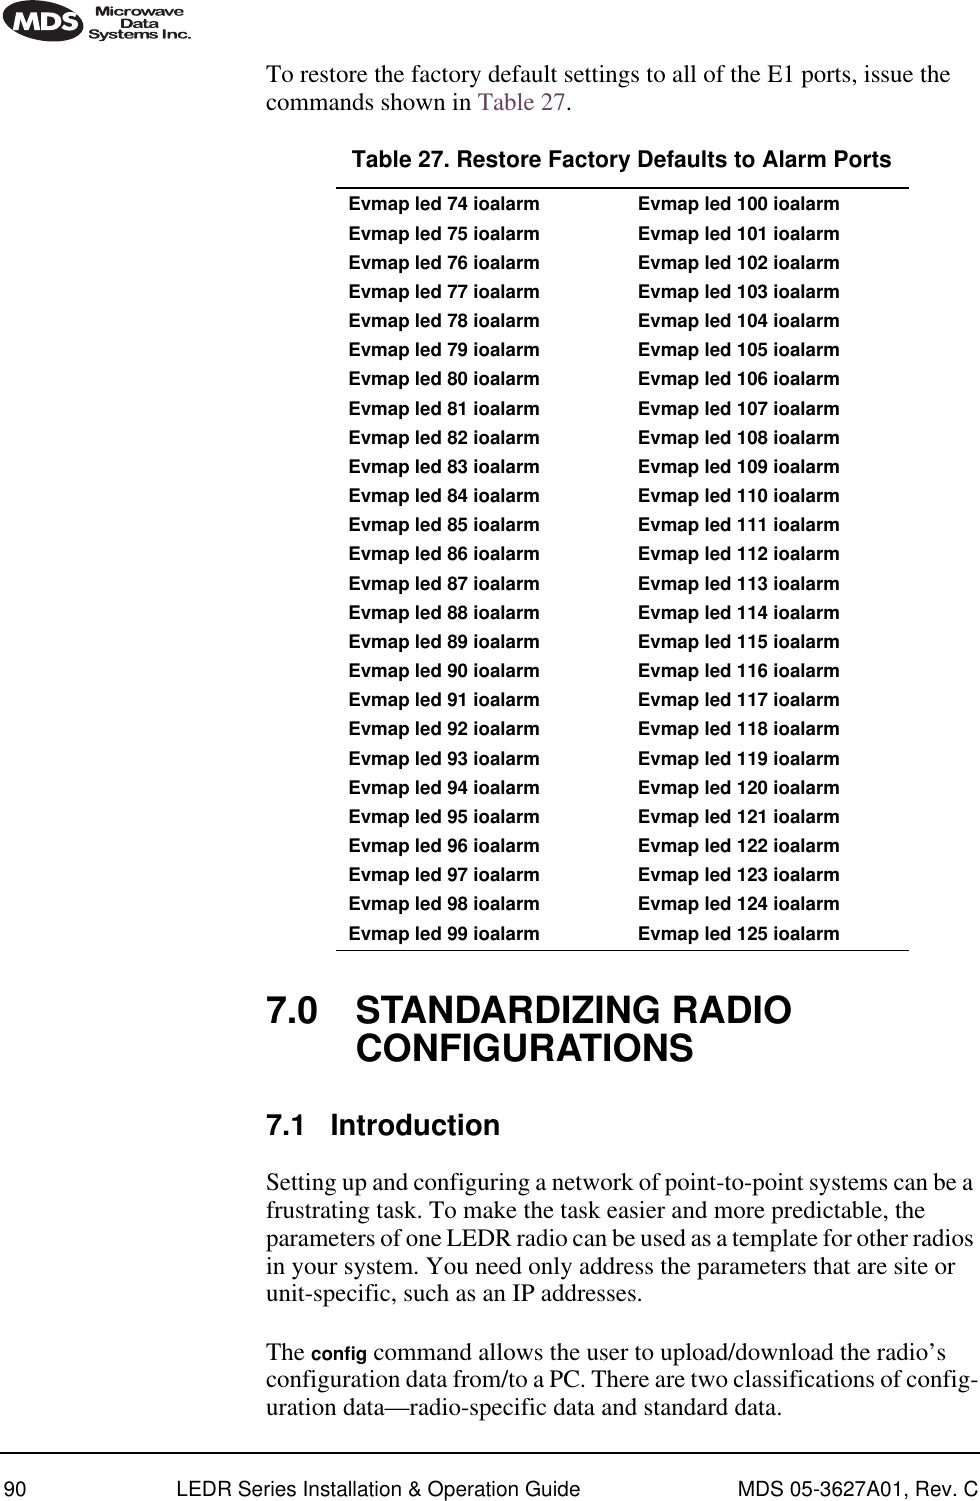 90 LEDR Series Installation &amp; Operation Guide MDS 05-3627A01, Rev. CTo restore the factory default settings to all of the E1 ports, issue the commands shown in Table 27.7.0 STANDARDIZING RADIO CONFIGURATIONS7.1 IntroductionSetting up and configuring a network of point-to-point systems can be a frustrating task. To make the task easier and more predictable, the parameters of one LEDR radio can be used as a template for other radios in your system. You need only address the parameters that are site or unit-specific, such as an IP addresses.The conﬁg command allows the user to upload/download the radio’s configuration data from/to a PC. There are two classifications of config-uration data—radio-specific data and standard data. Table 27. Restore Factory Defaults to Alarm Ports   Evmap led 74 ioalarmEvmap led 75 ioalarmEvmap led 76 ioalarmEvmap led 77 ioalarmEvmap led 78 ioalarmEvmap led 79 ioalarmEvmap led 80 ioalarmEvmap led 81 ioalarmEvmap led 82 ioalarmEvmap led 83 ioalarmEvmap led 84 ioalarmEvmap led 85 ioalarmEvmap led 86 ioalarmEvmap led 87 ioalarmEvmap led 88 ioalarmEvmap led 89 ioalarmEvmap led 90 ioalarmEvmap led 91 ioalarmEvmap led 92 ioalarmEvmap led 93 ioalarmEvmap led 94 ioalarmEvmap led 95 ioalarmEvmap led 96 ioalarmEvmap led 97 ioalarmEvmap led 98 ioalarmEvmap led 99 ioalarmEvmap led 100 ioalarmEvmap led 101 ioalarmEvmap led 102 ioalarmEvmap led 103 ioalarmEvmap led 104 ioalarmEvmap led 105 ioalarmEvmap led 106 ioalarmEvmap led 107 ioalarmEvmap led 108 ioalarmEvmap led 109 ioalarmEvmap led 110 ioalarmEvmap led 111 ioalarmEvmap led 112 ioalarmEvmap led 113 ioalarmEvmap led 114 ioalarmEvmap led 115 ioalarmEvmap led 116 ioalarmEvmap led 117 ioalarmEvmap led 118 ioalarmEvmap led 119 ioalarmEvmap led 120 ioalarmEvmap led 121 ioalarmEvmap led 122 ioalarmEvmap led 123 ioalarmEvmap led 124 ioalarmEvmap led 125 ioalarm